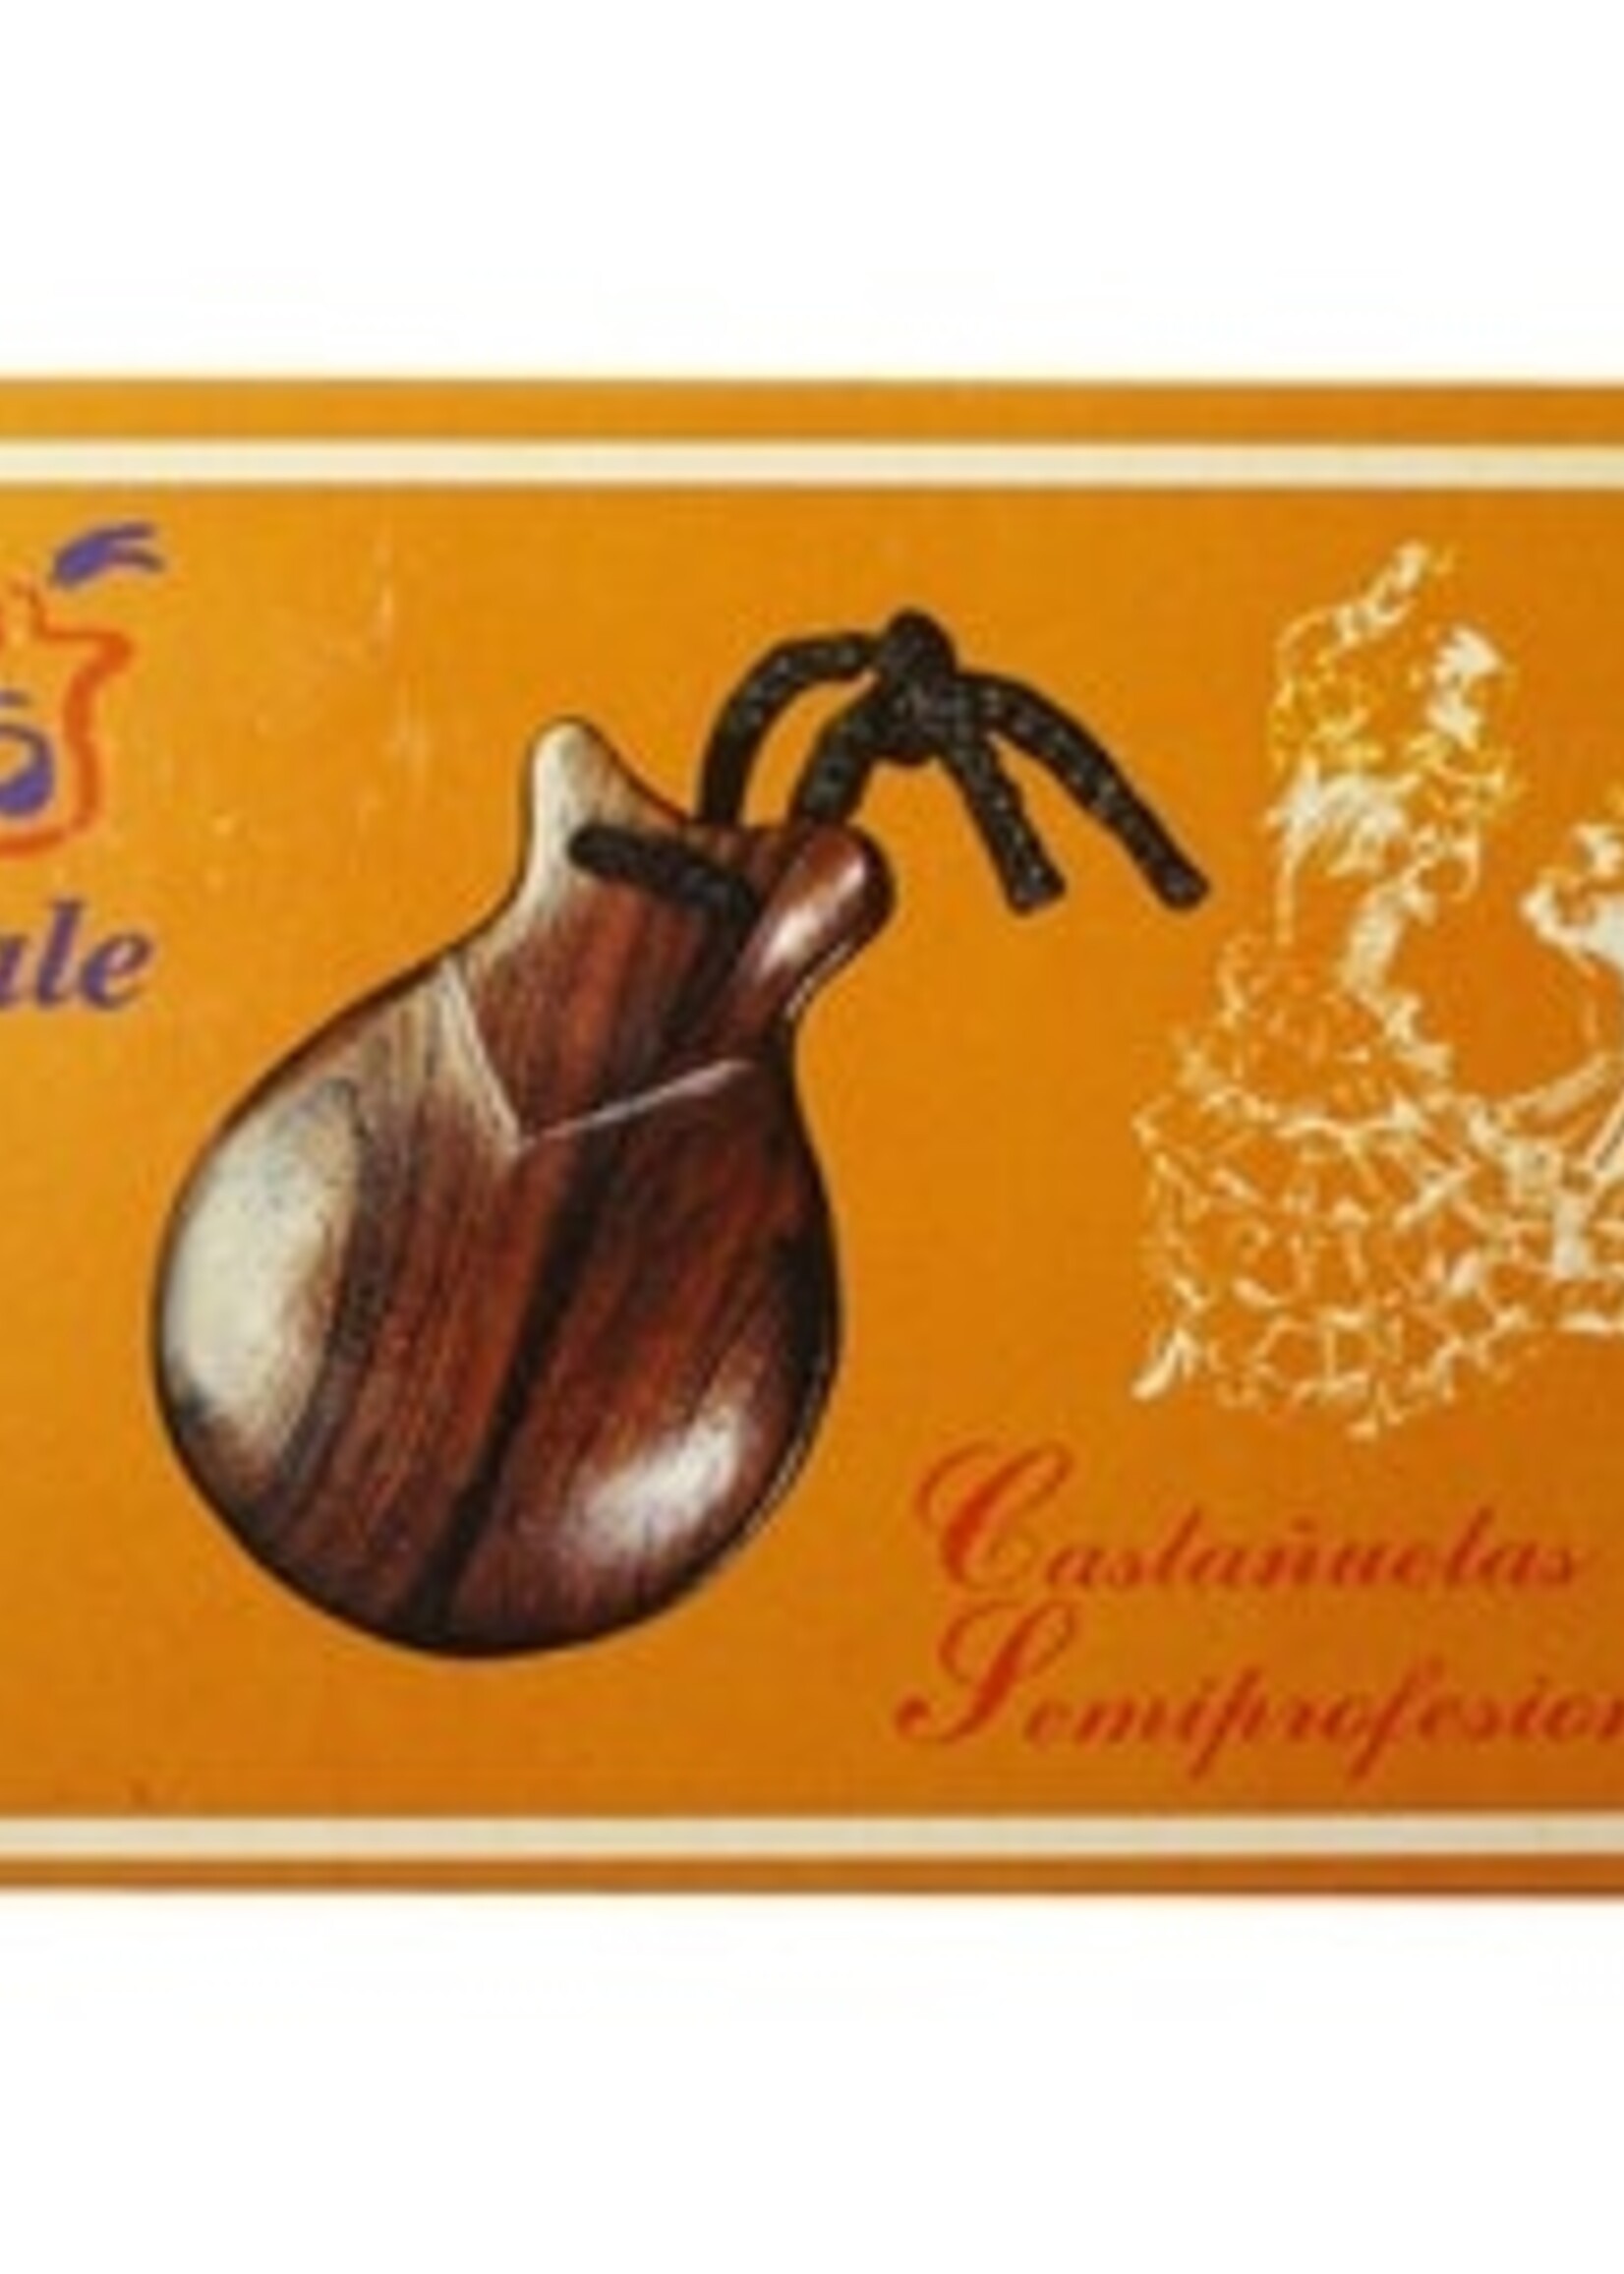 Castanets/ Castanuelas Semiprofesionales size 5